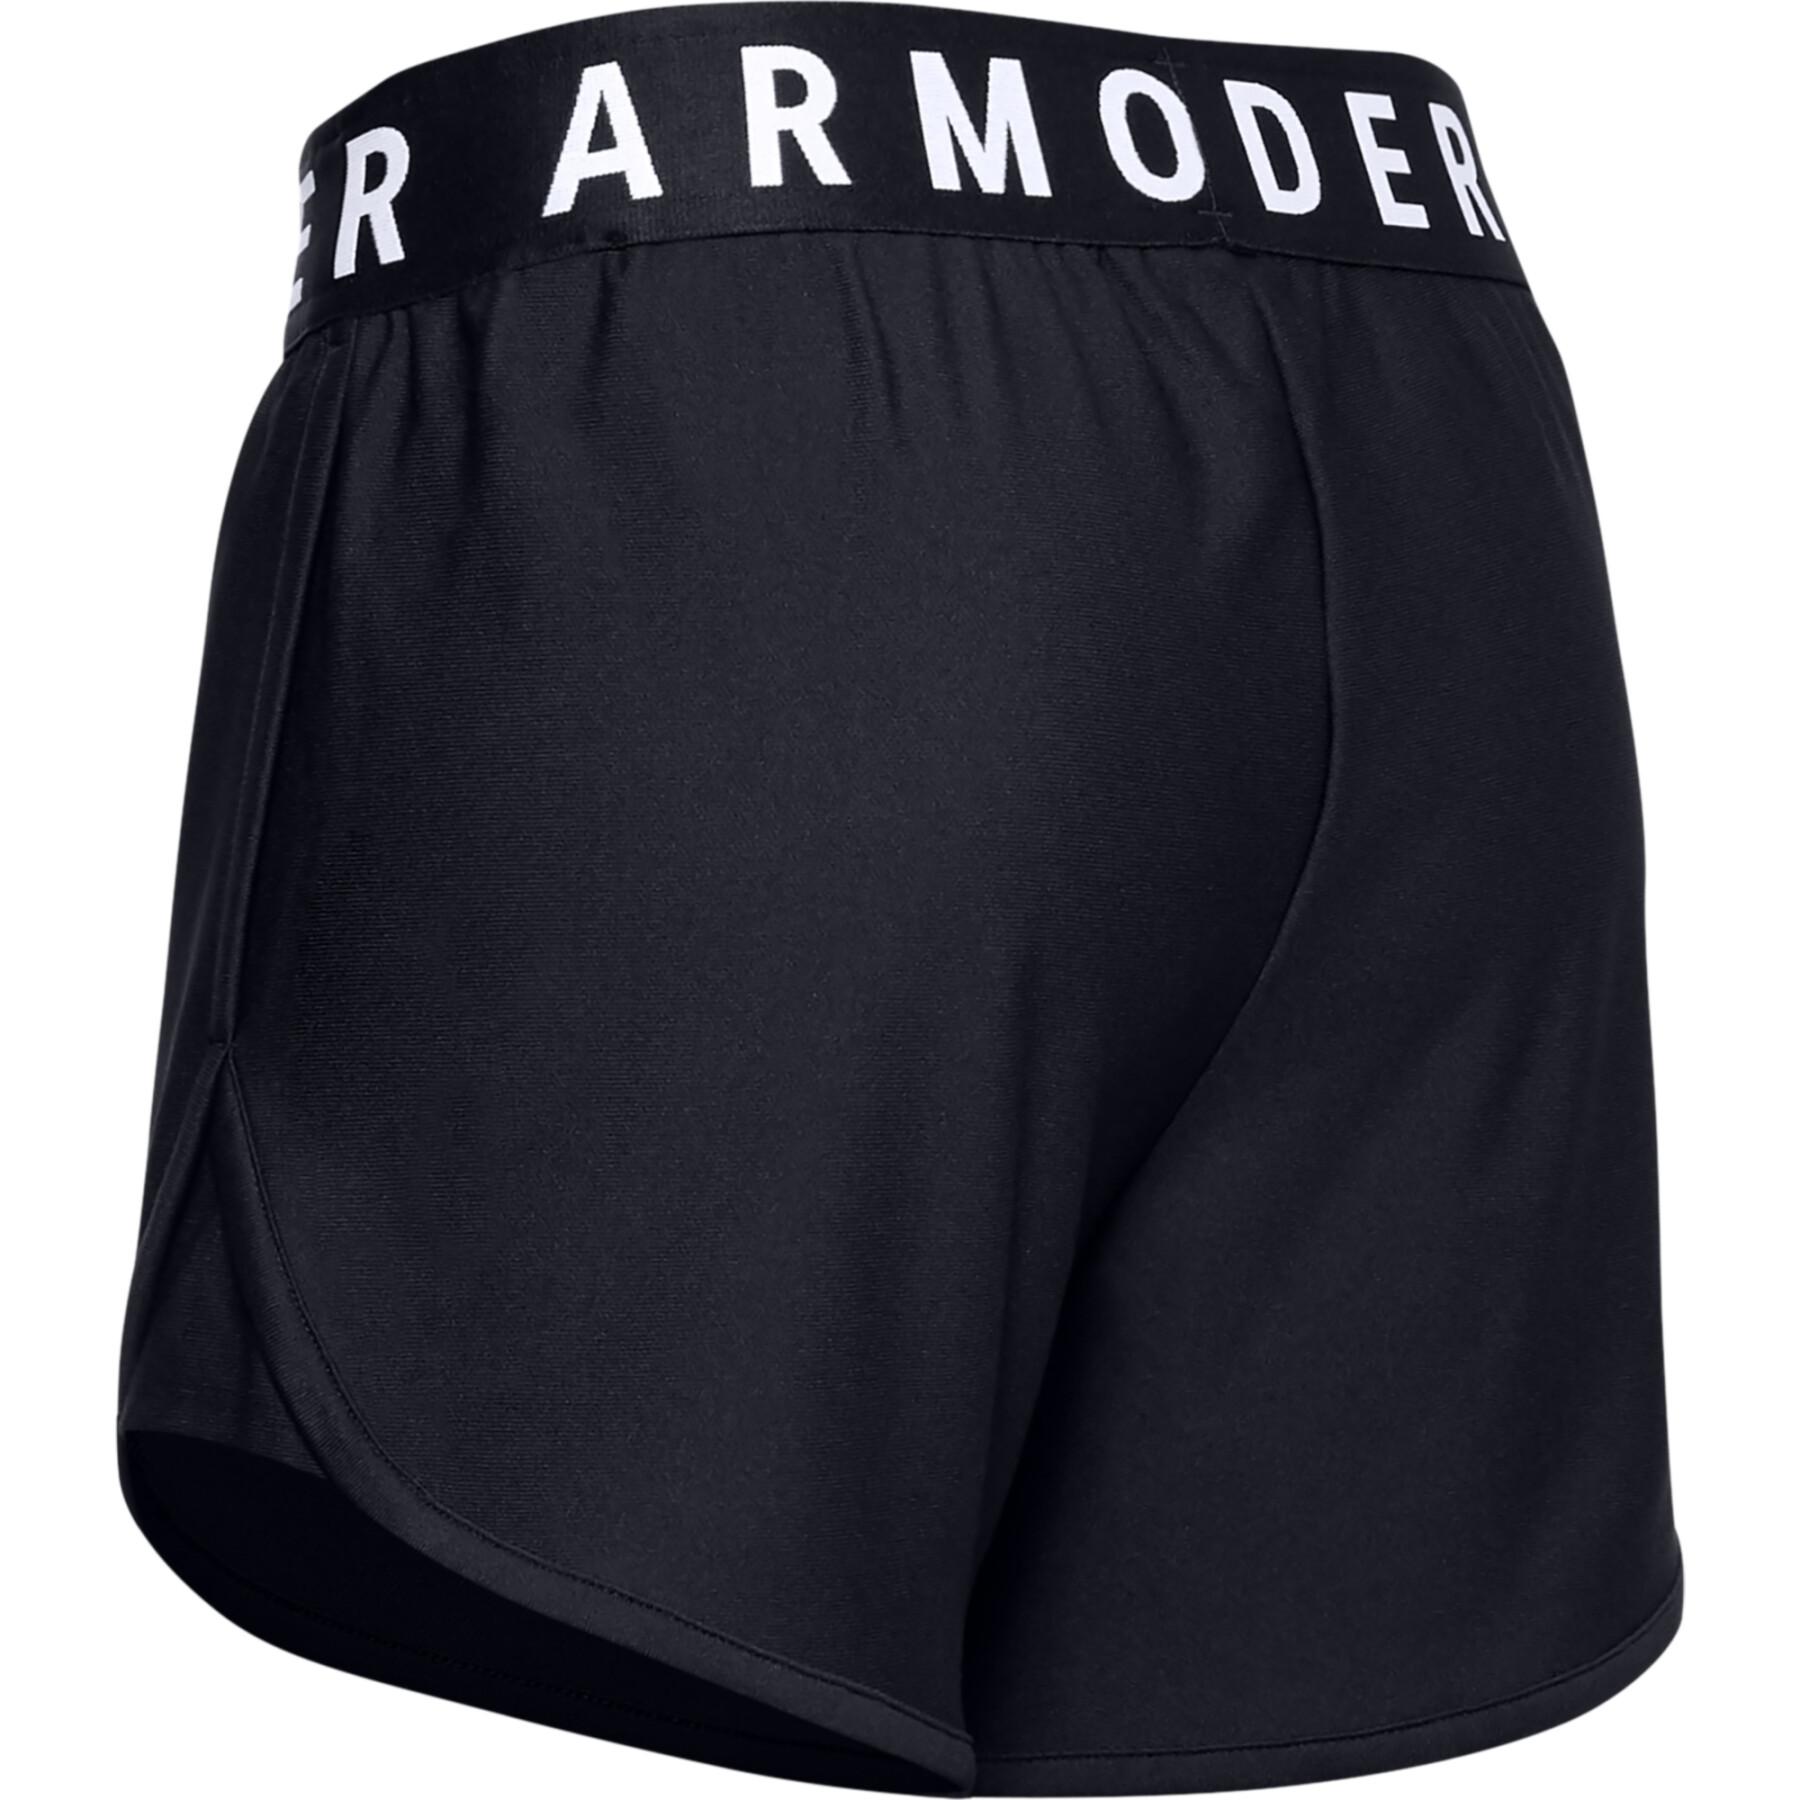 Women's shorts Under Armour 13 Play Up